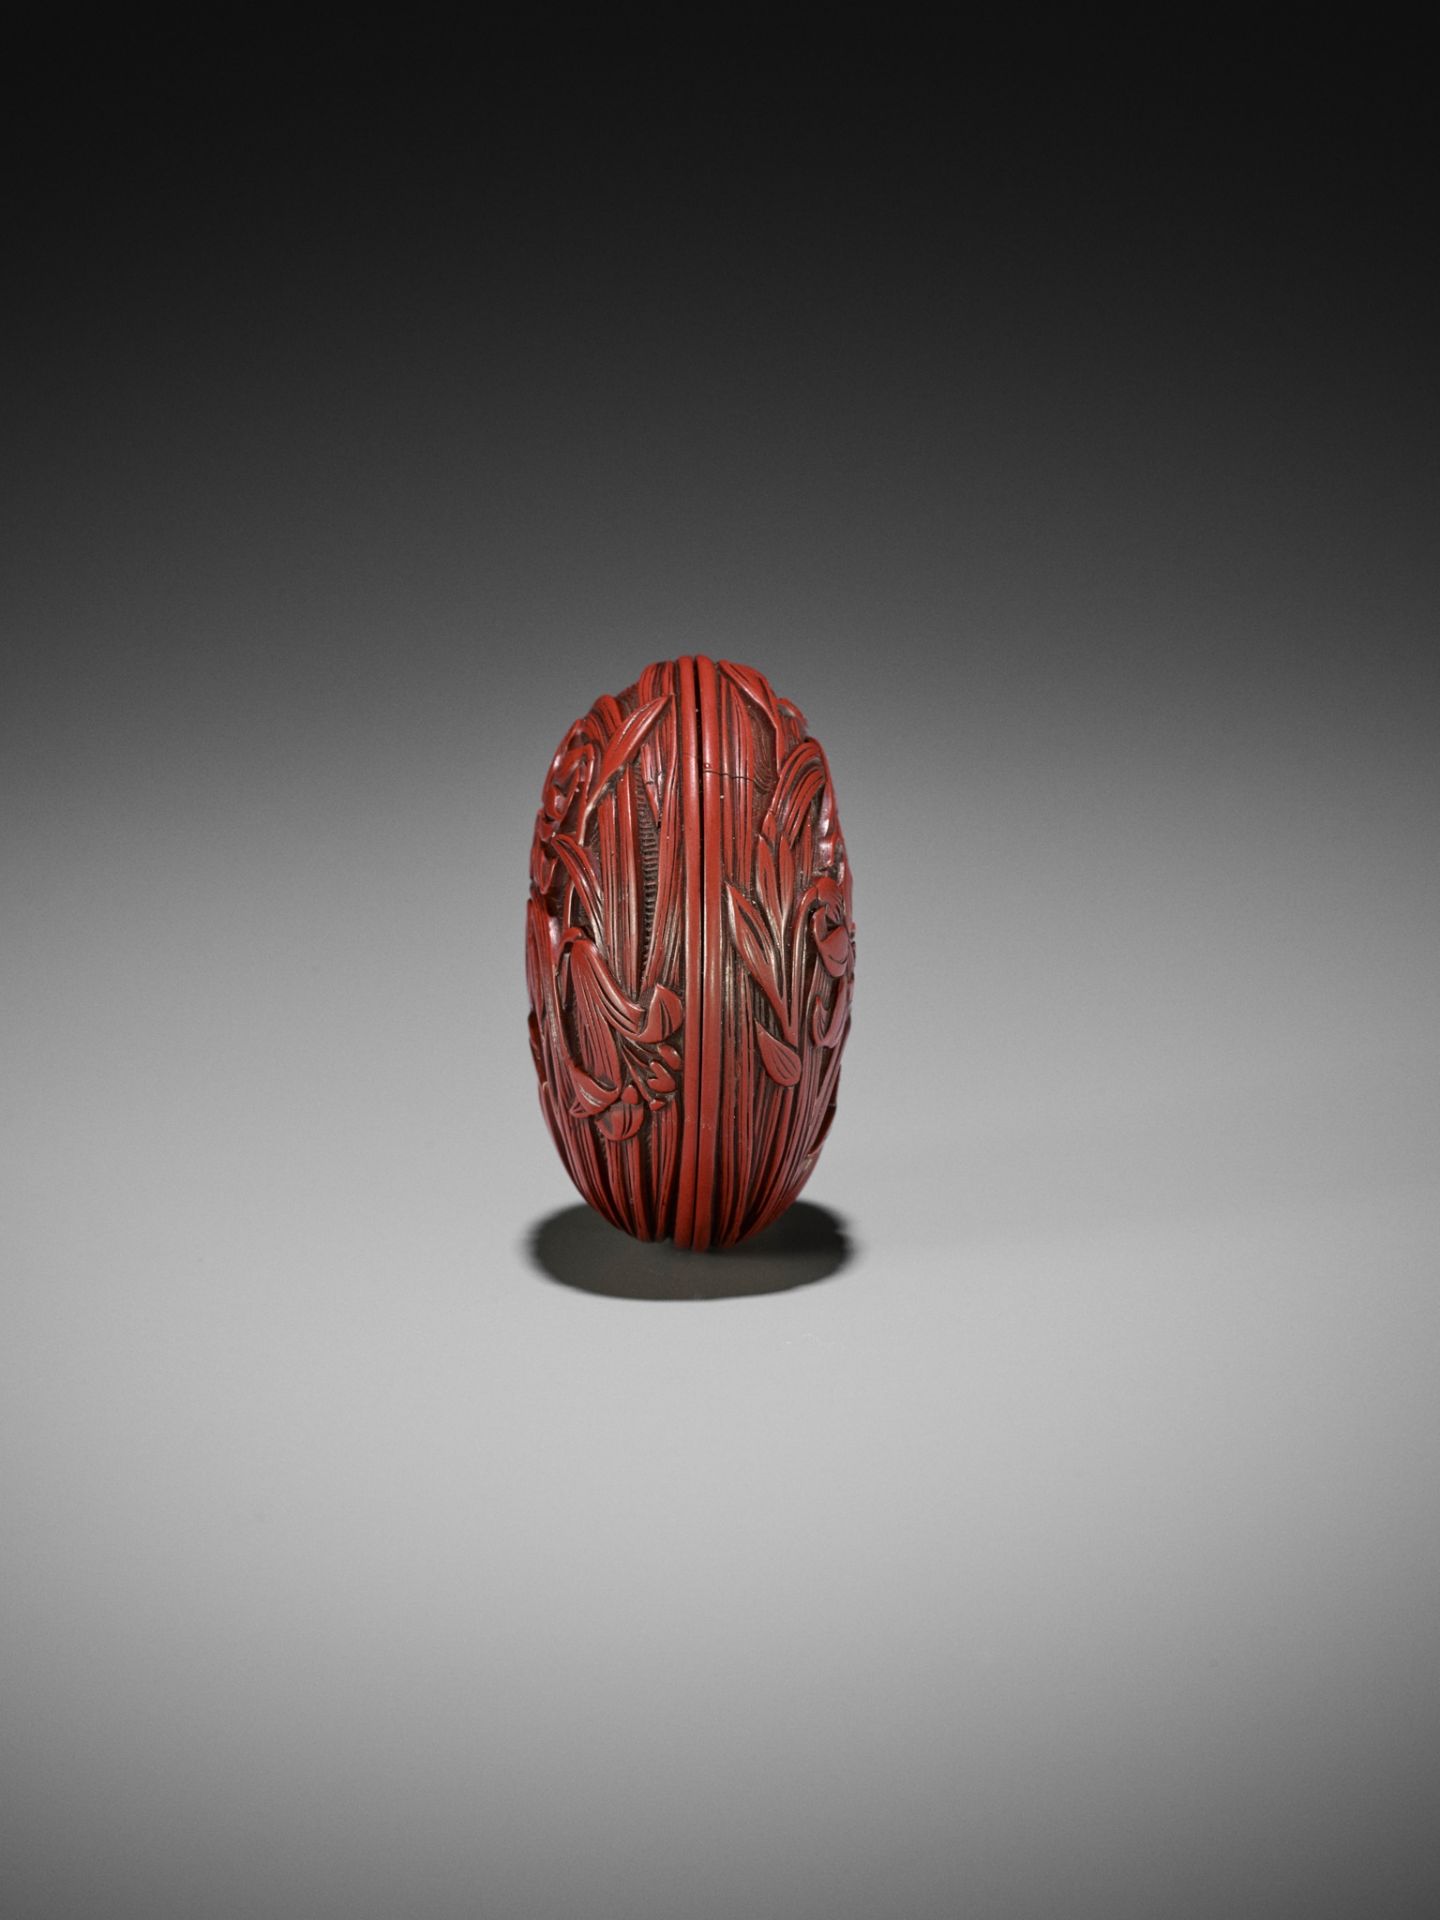 A FINE TSUISHU (CARVED RED LACQUER) MANJU NETSUKE WITH LILIES - Image 7 of 8